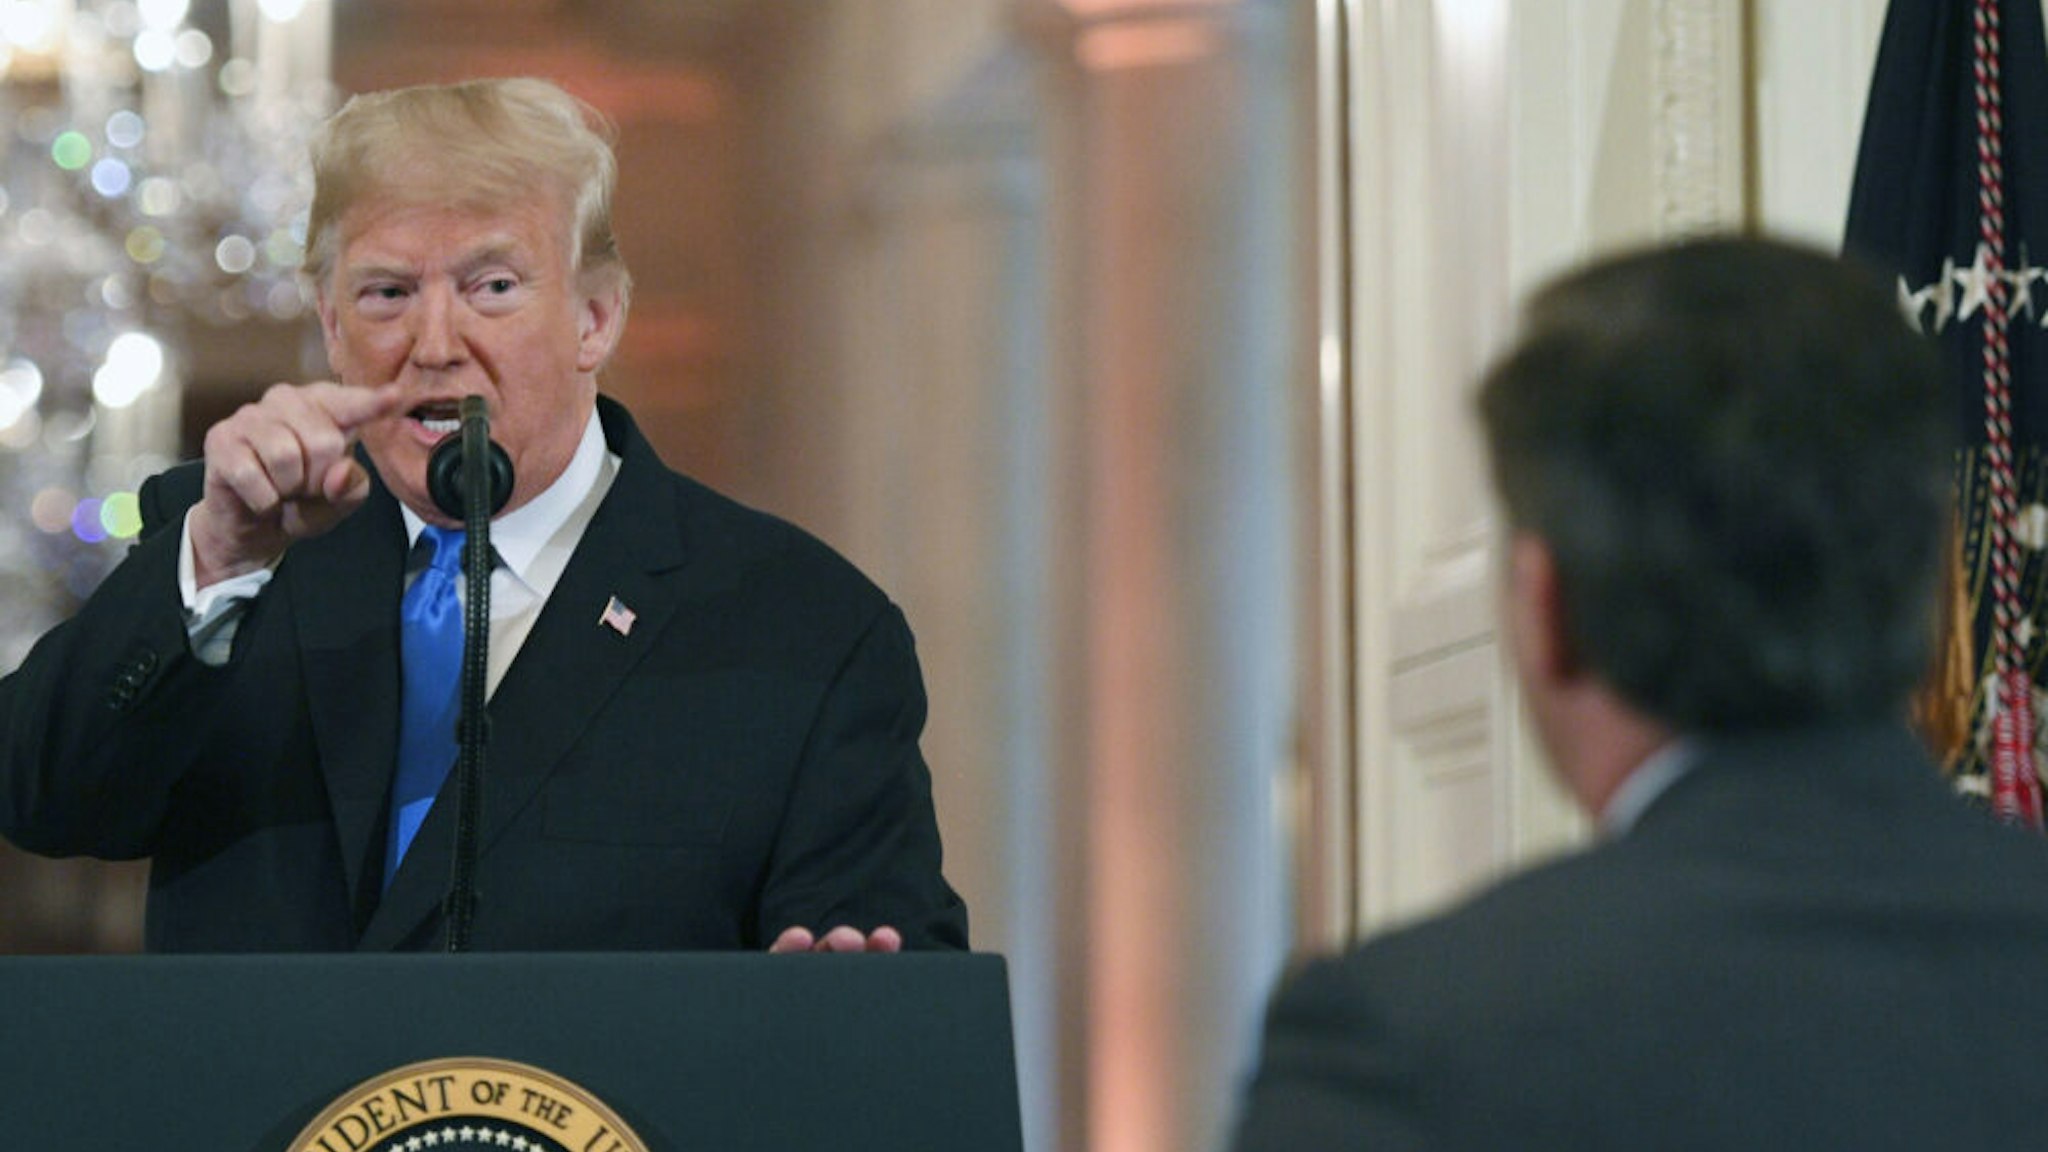 TOPSHOT - US President Donald Trump points to journalist Jim Acosta from CNN during a post-election press conference in the East Room of the White House in Washington, DC on November 7, 2018. (Photo by Jim WATSON / AFP)